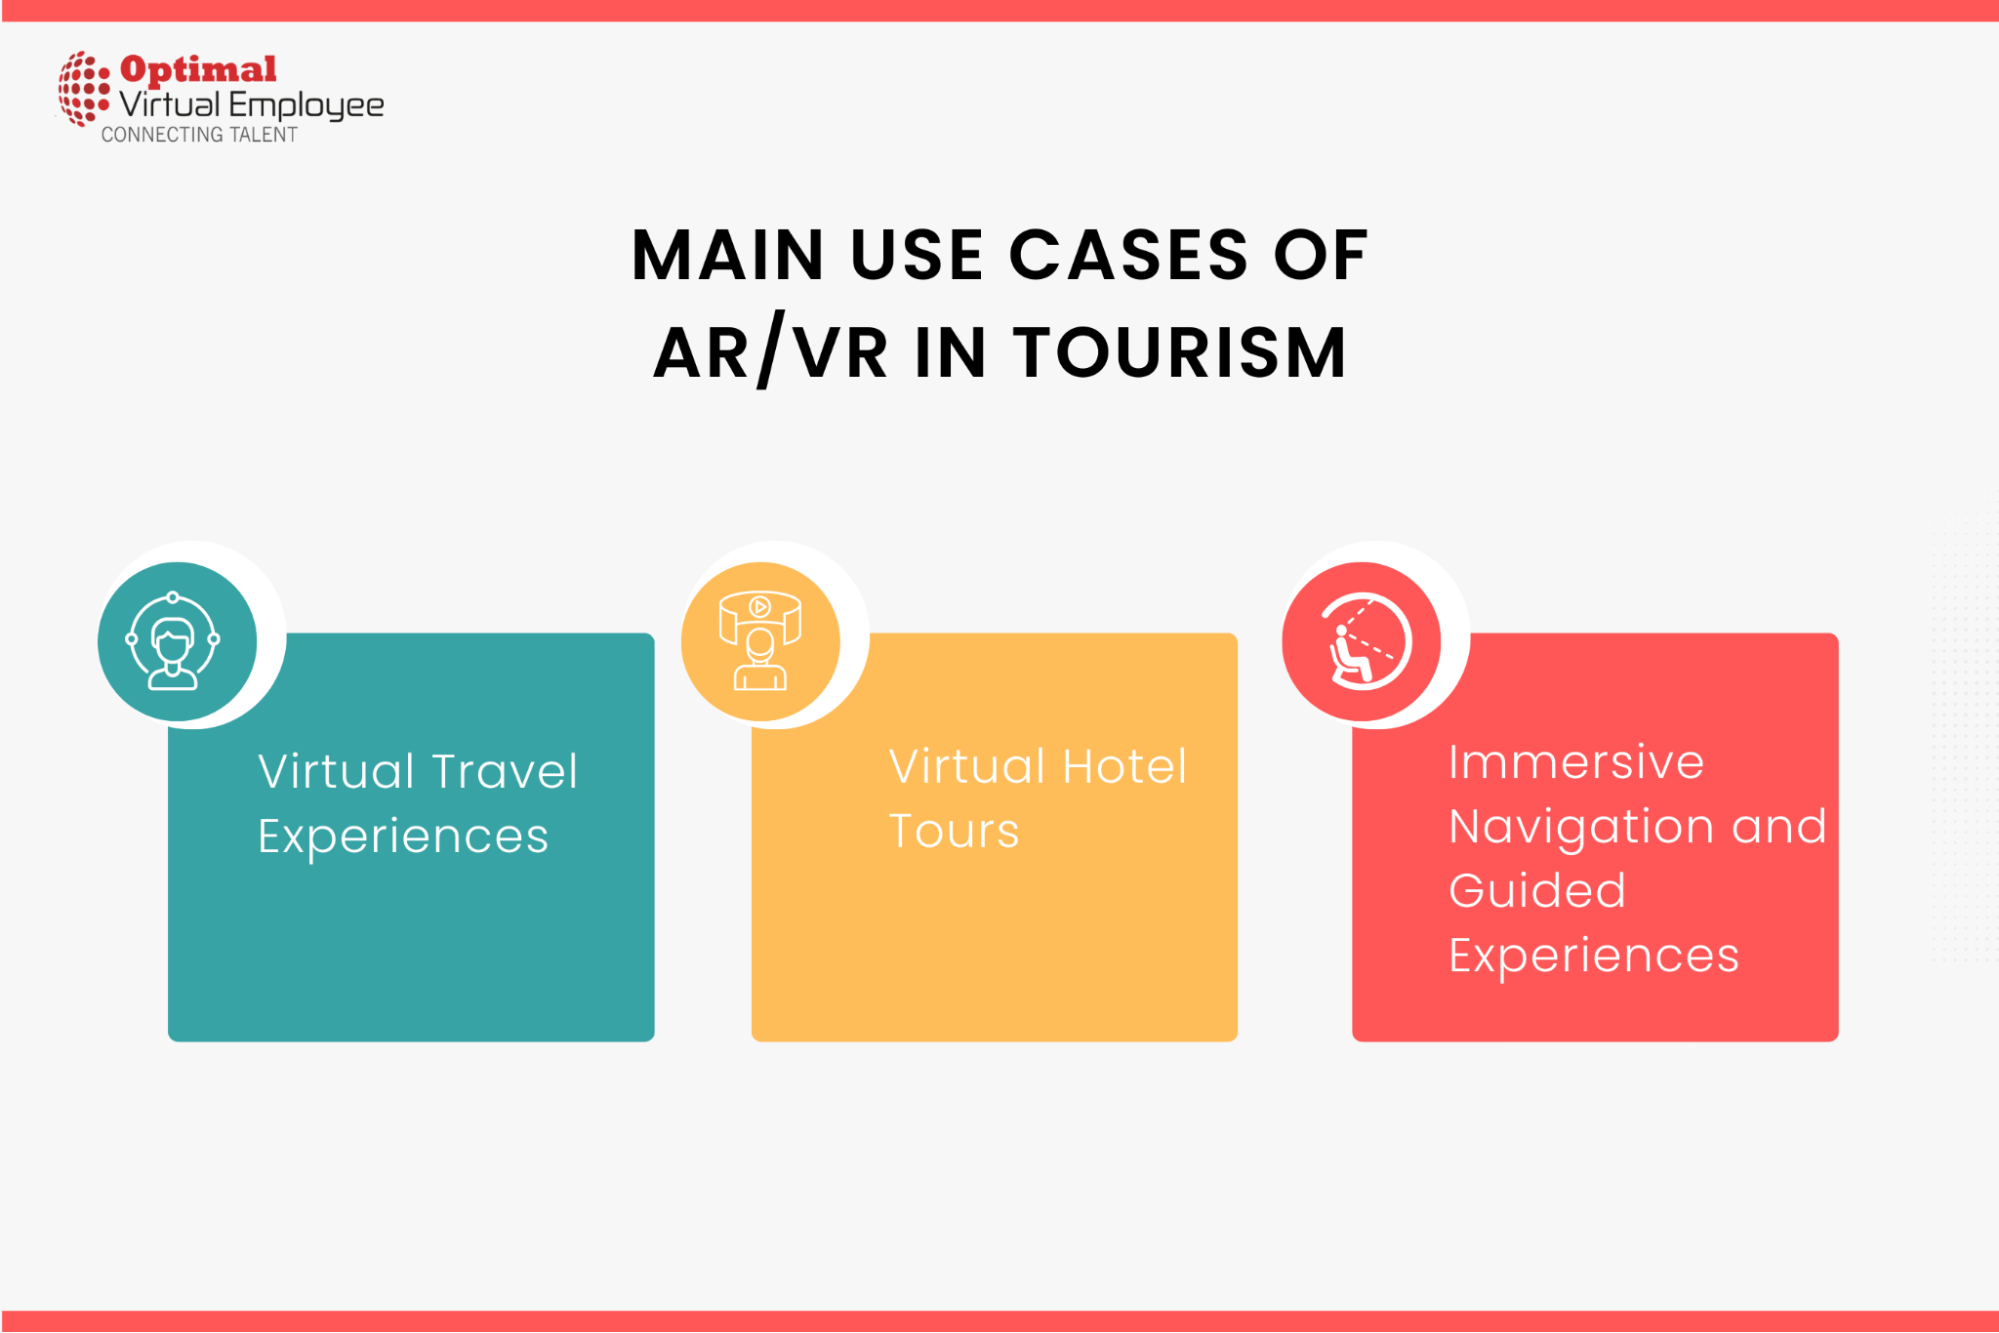 What are the main use cases of AR/VR in tourism